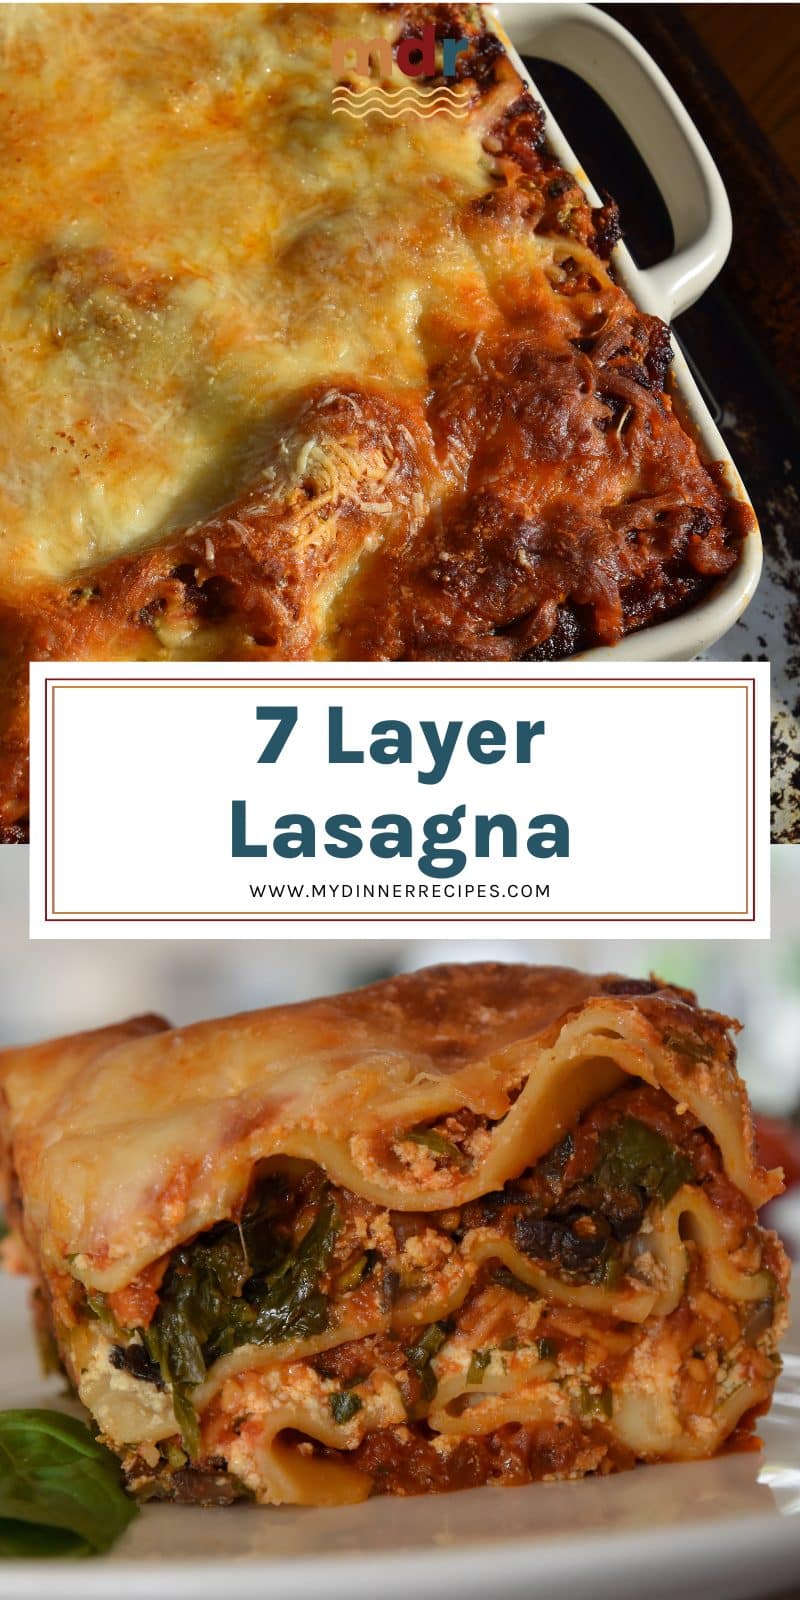 Full 7 layer lasagna fresh from the oven and slice of 7 layer lasagna on a plate.